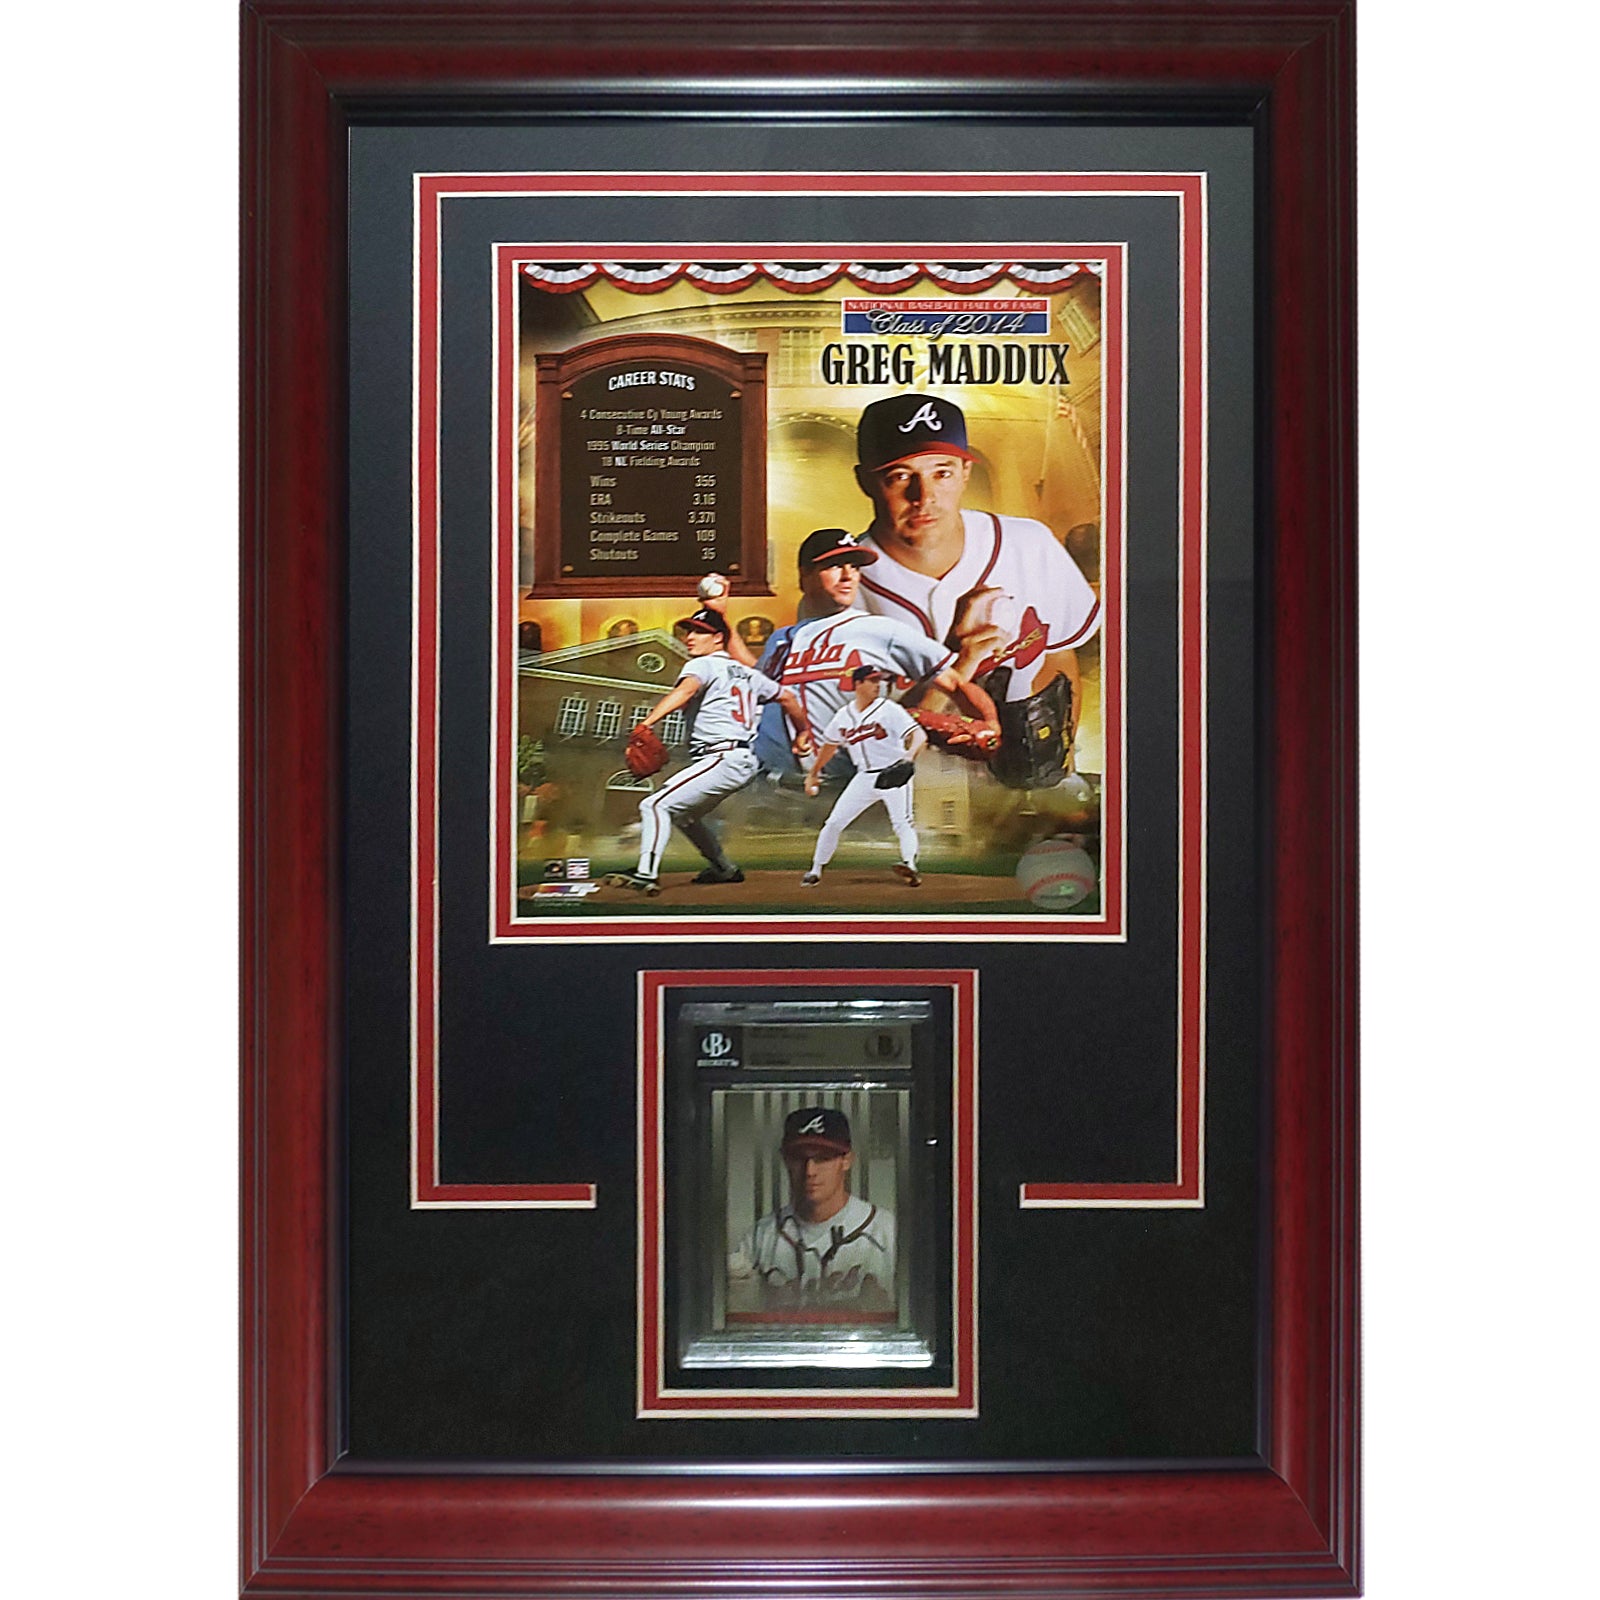 Greg Maddux Autographed Baseball Card Deluxe Framed with Atlanta Braves (HOF Collage) 8x10 Photo